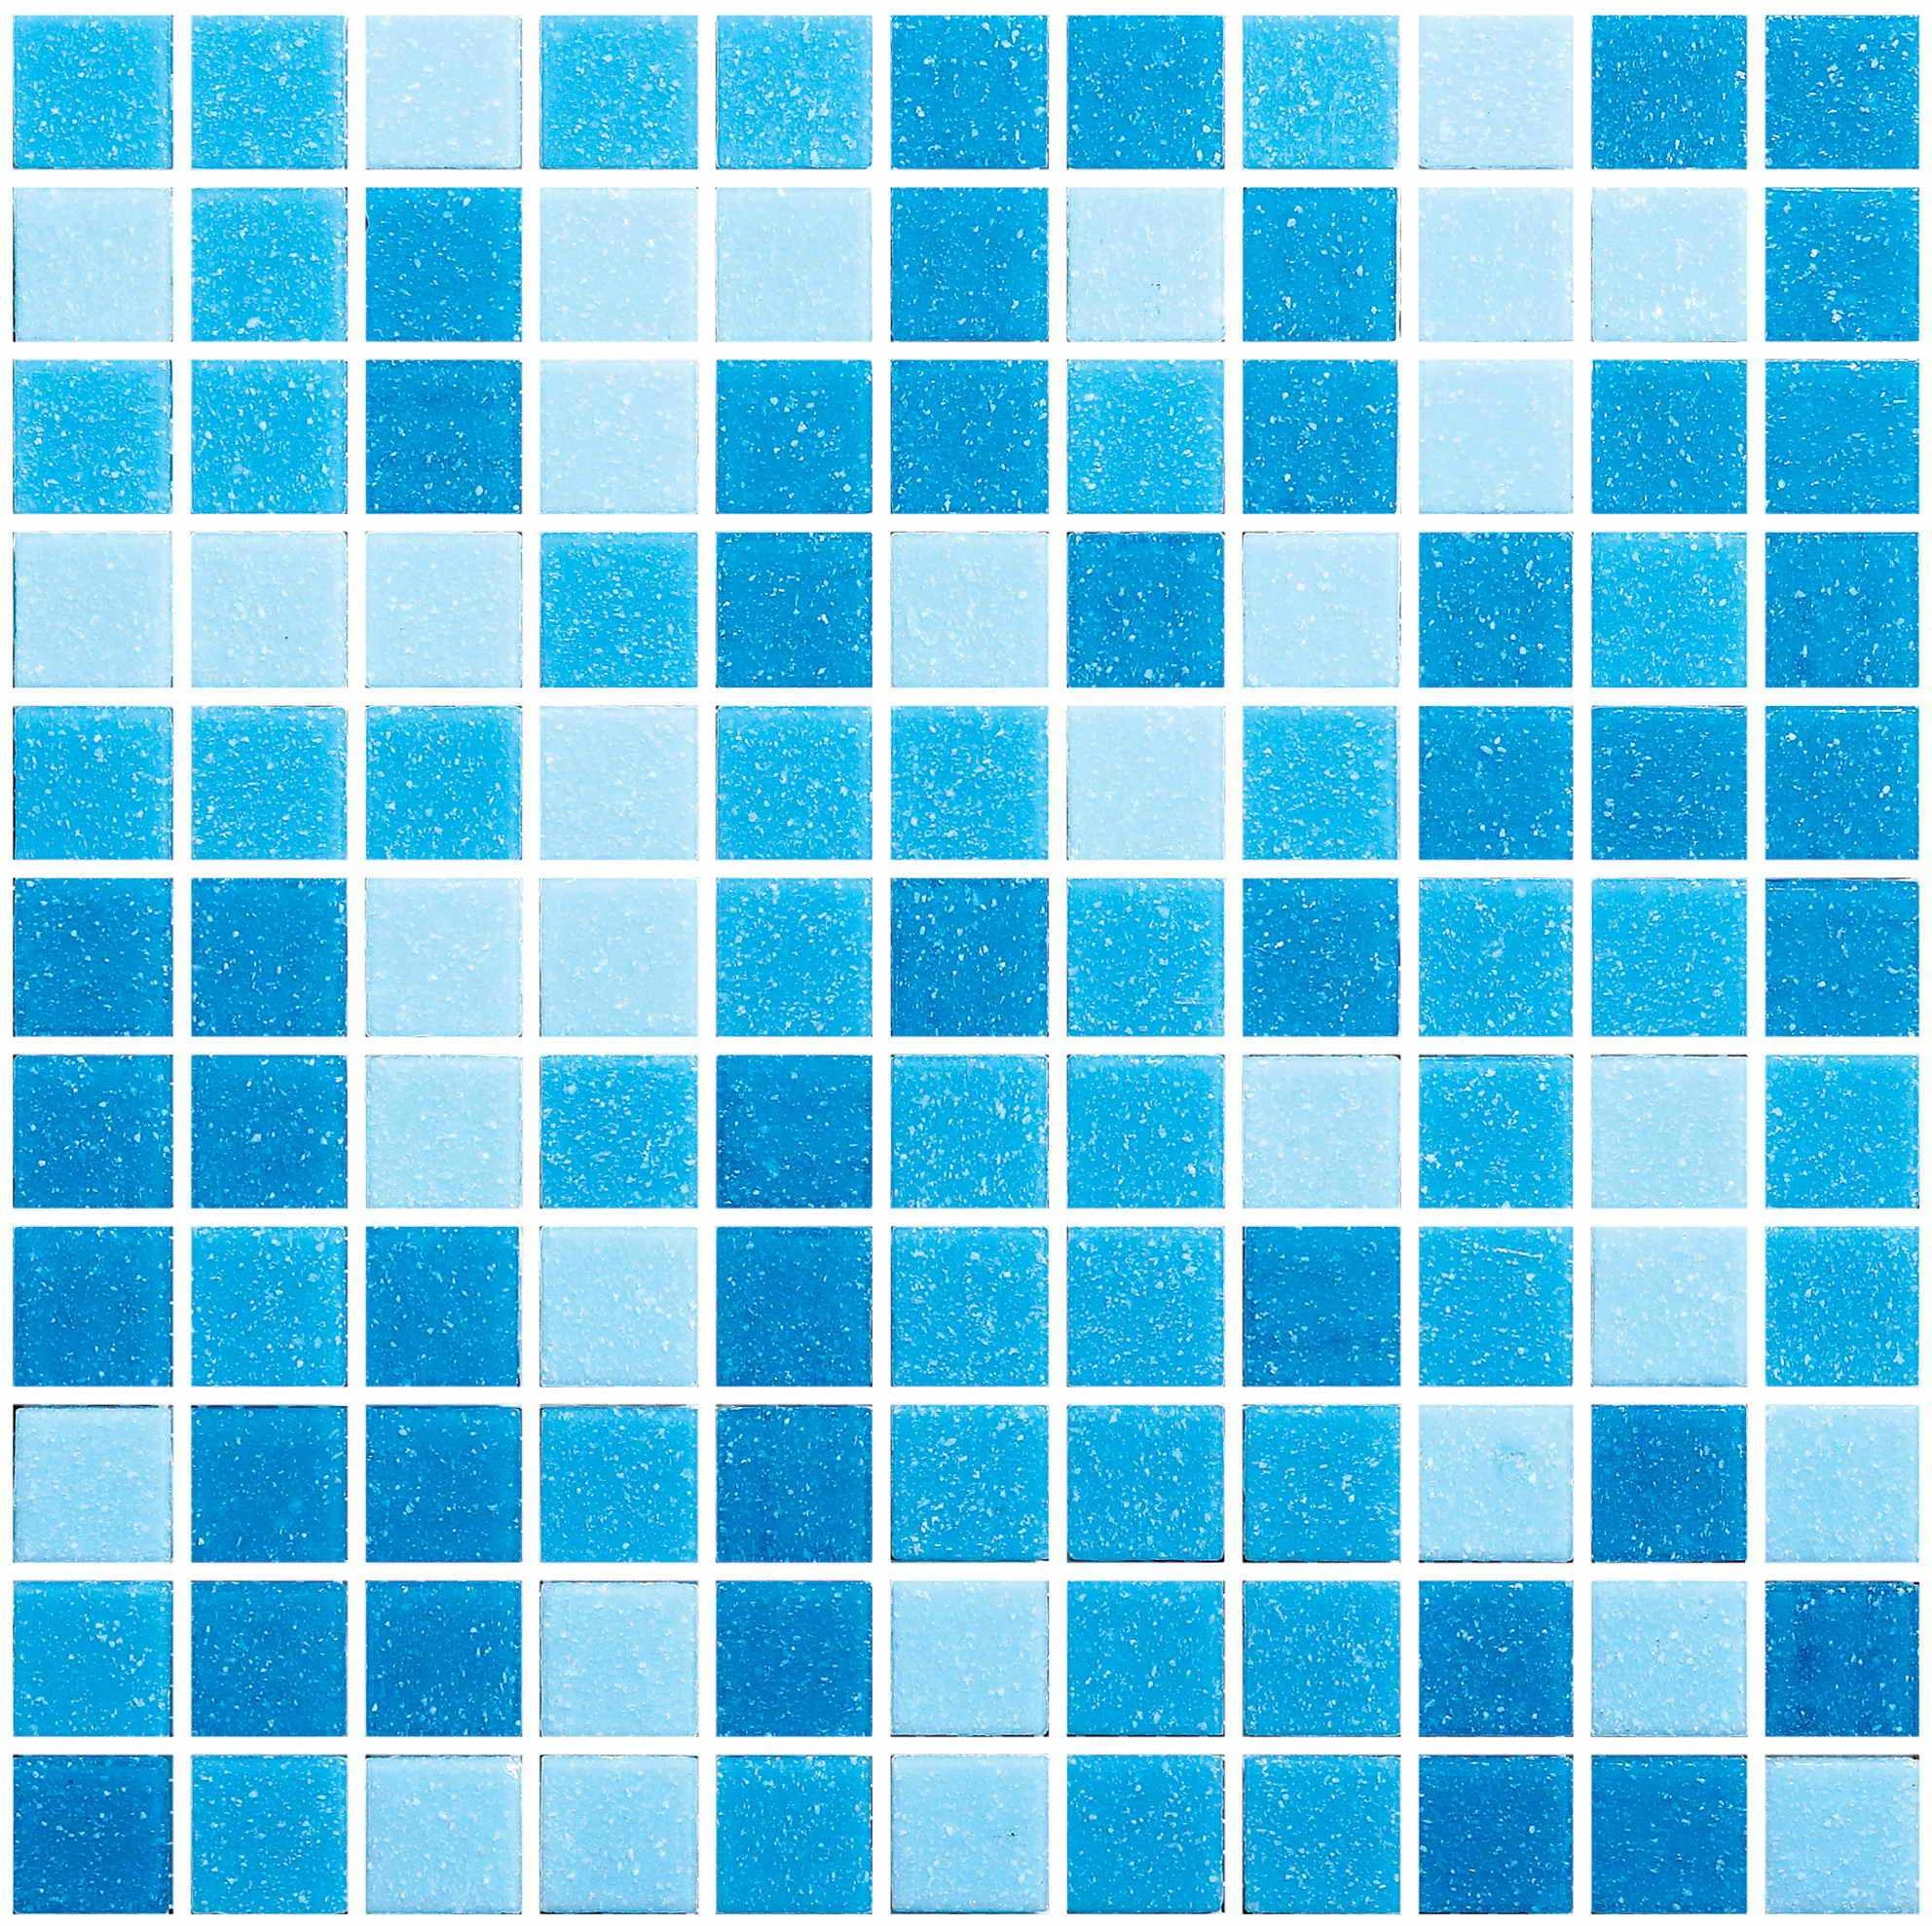 Hot swimming pool perfect use blue multi color glass mosaic tile